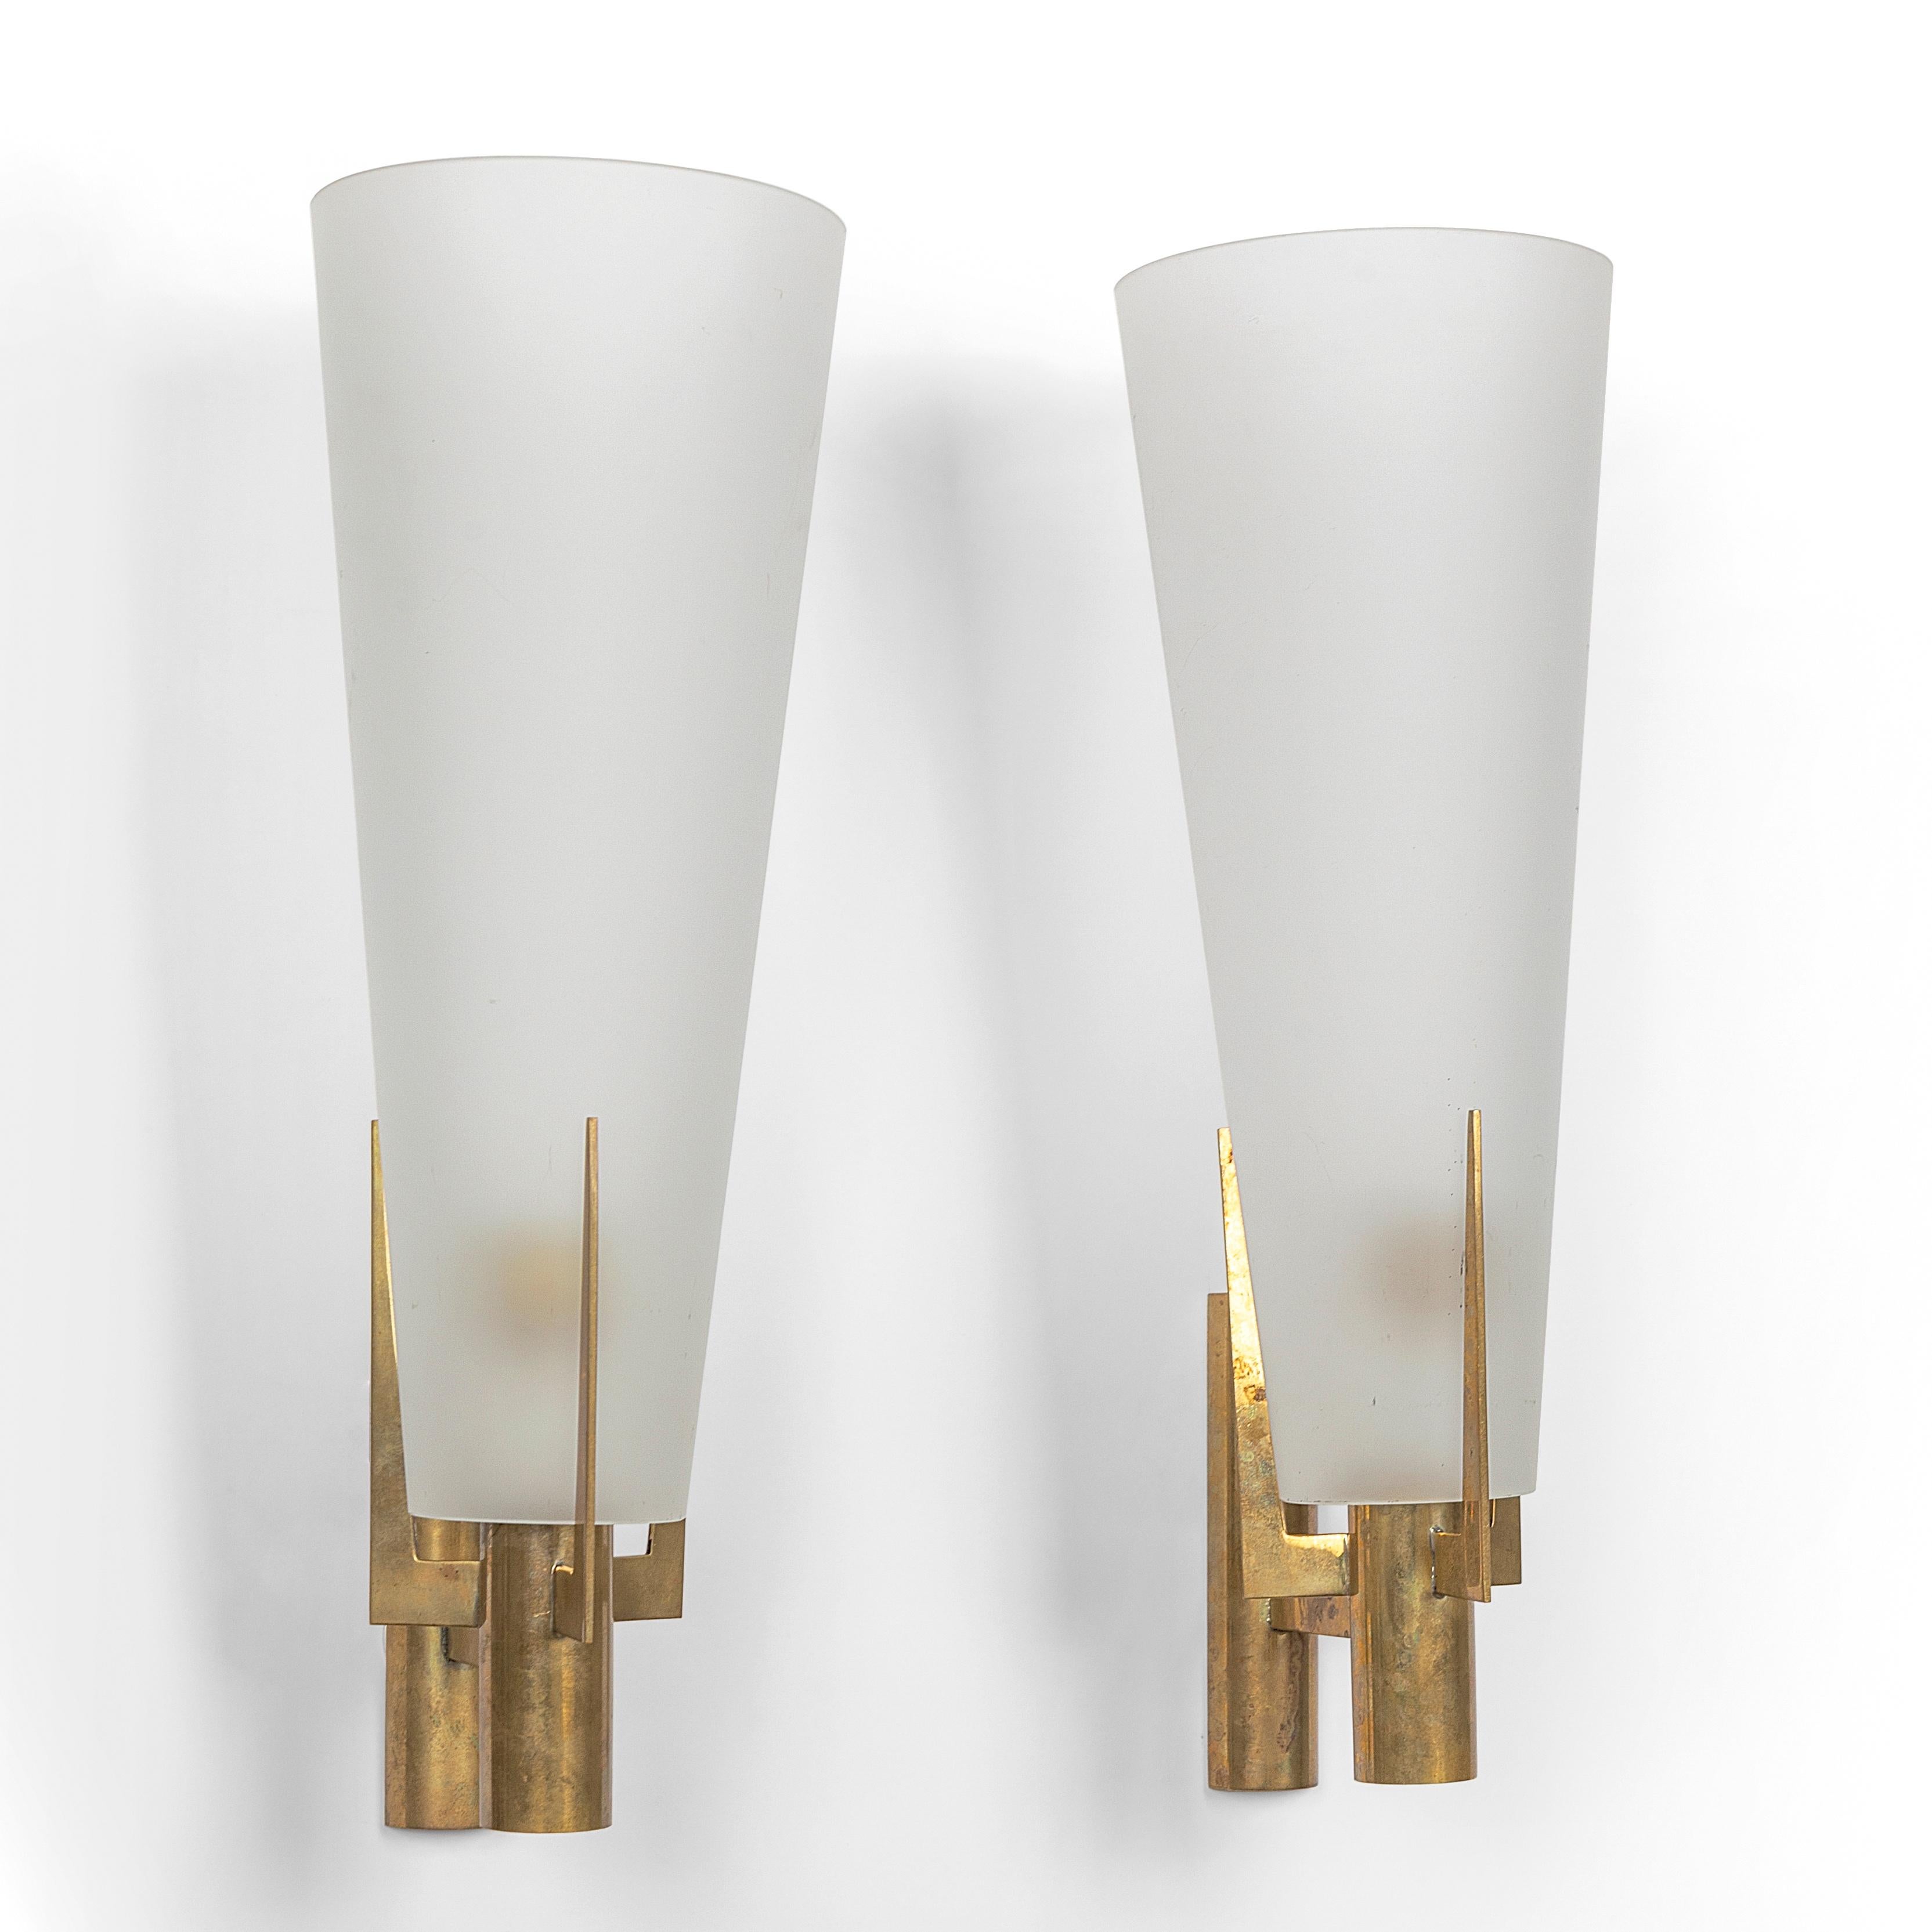 Elegant pair of original large scale wall sconces by Stilnovo, Model 2021/1 produced in Italy 1959-1960. Brass three pronged armature and tapered satin glass conical shades. 19.5 inches tall.
Each sconce has a single standard size Edison screw